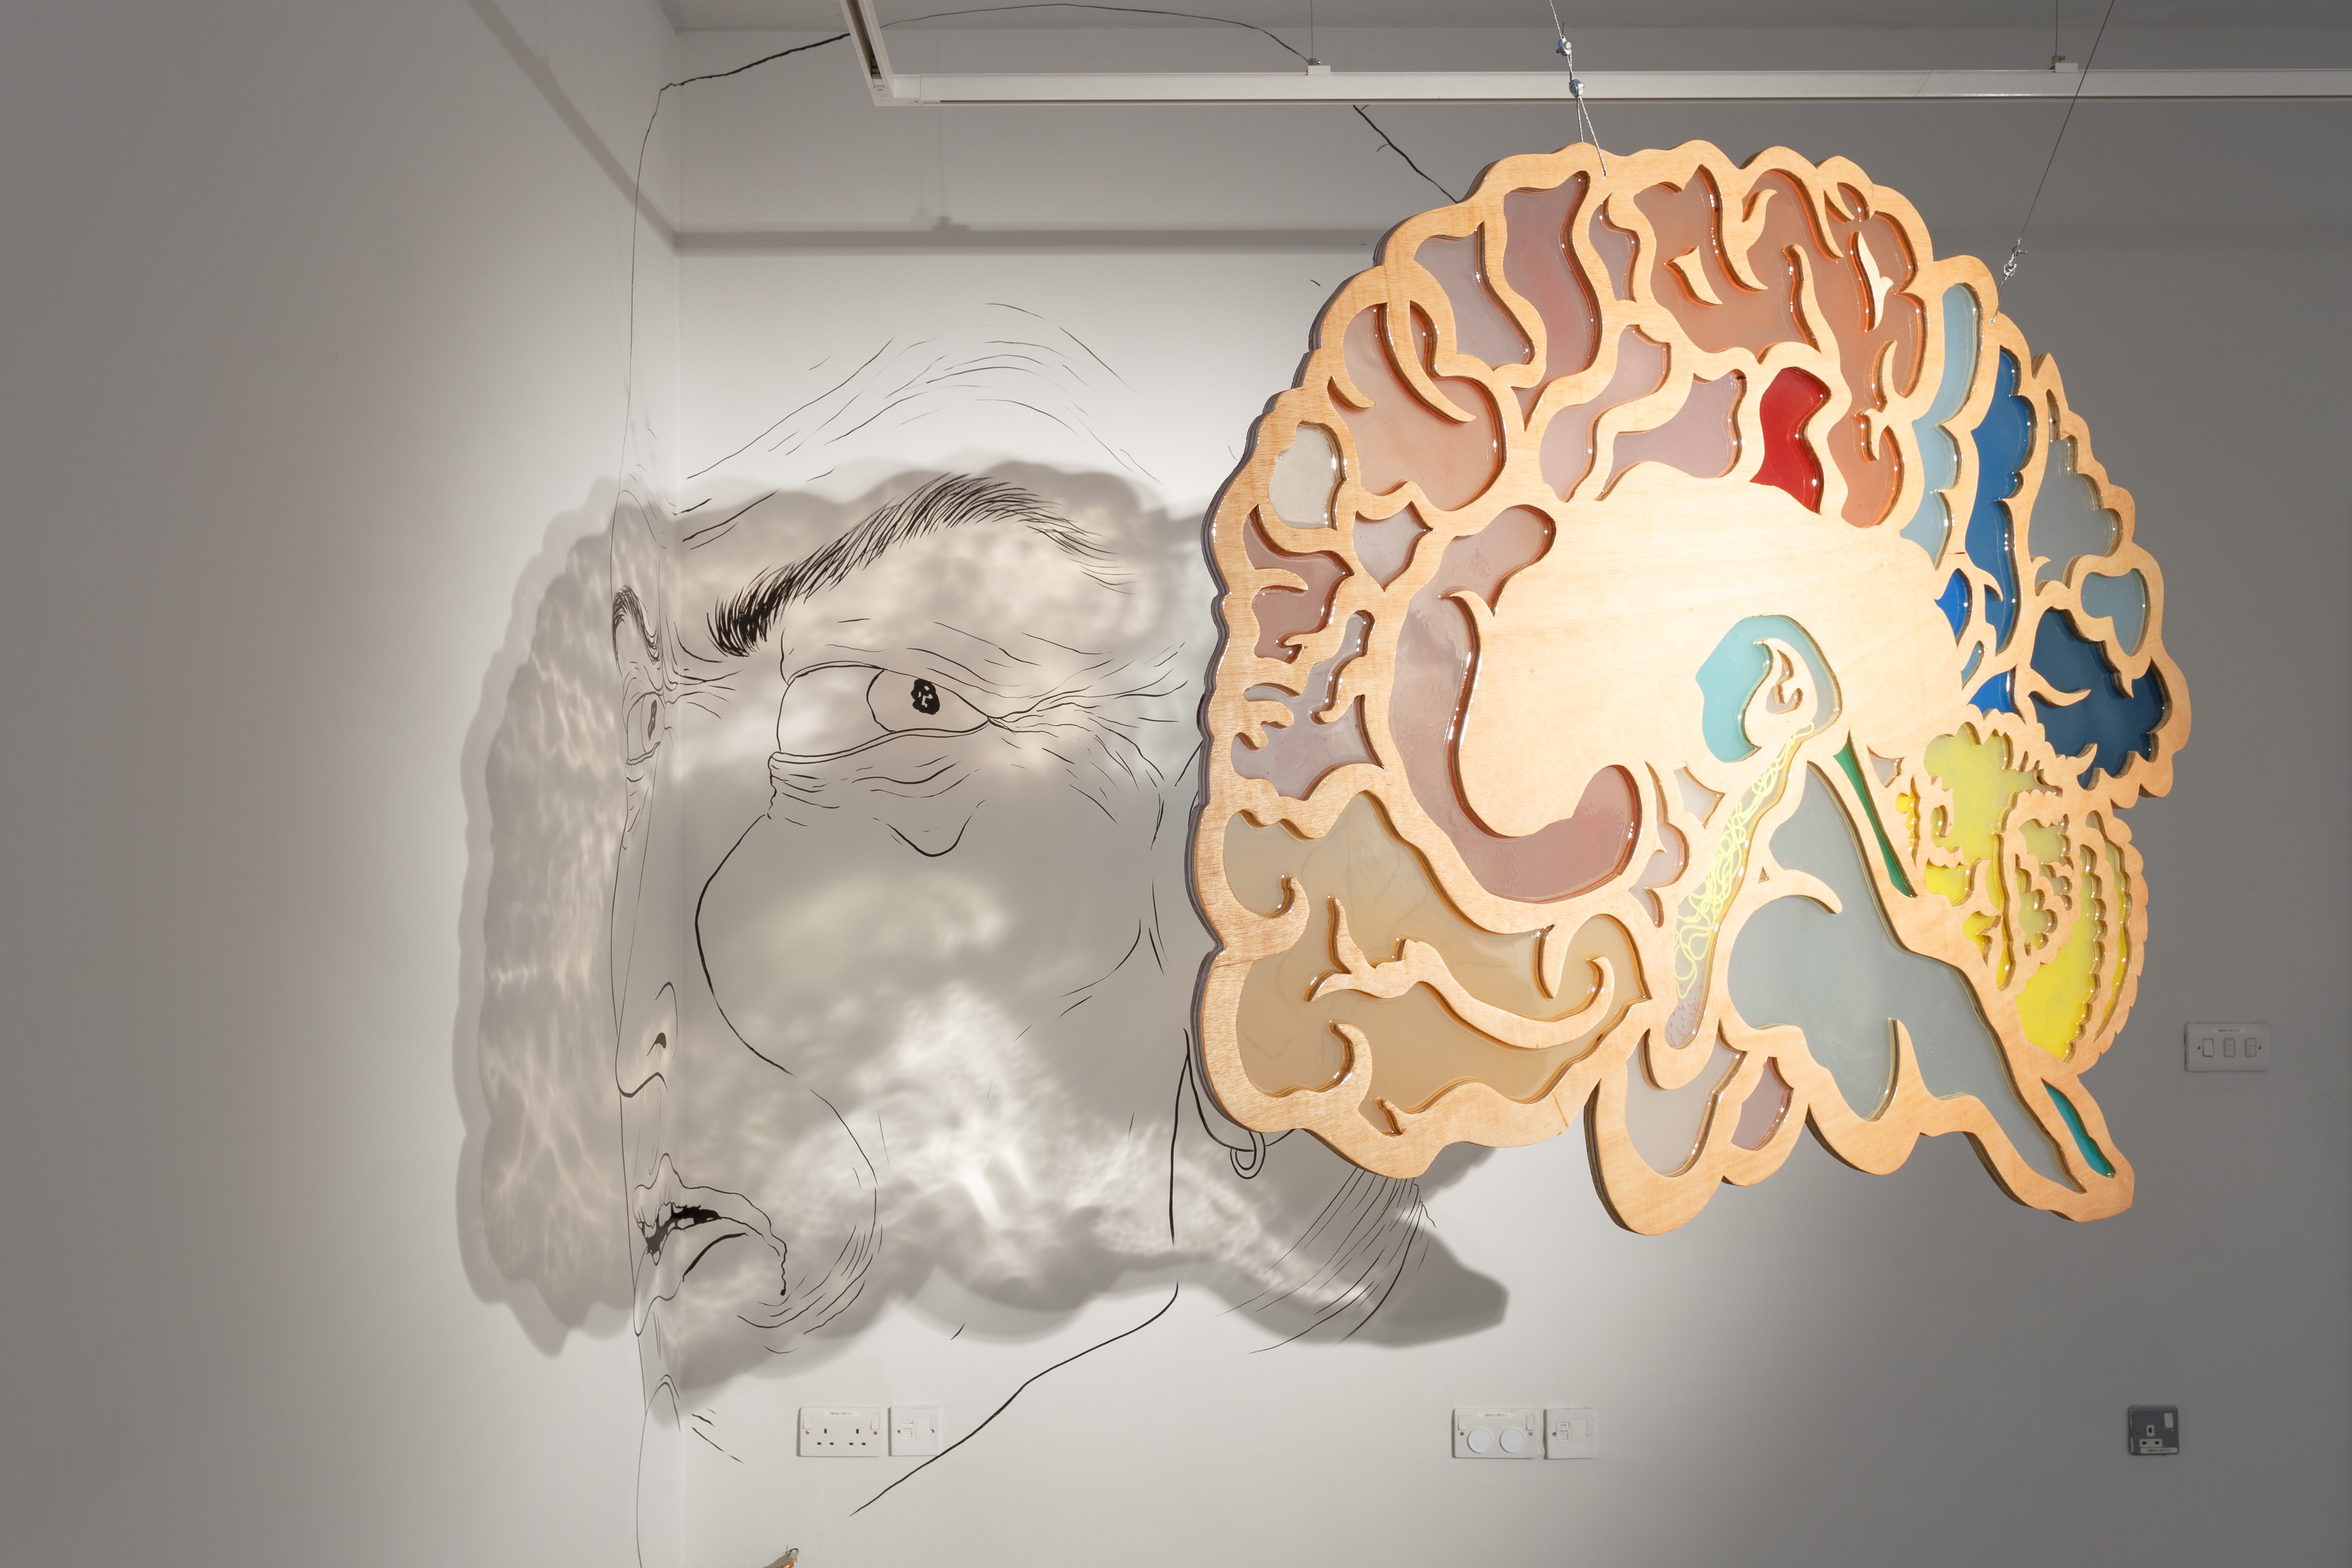 A hanging sculpture depicting a brain, with cloud like forms. it is made from plywood with coloured glass inserts. The shadow of the work falls on the wall behind, where it intertwines with a drawing in black on the white surface.